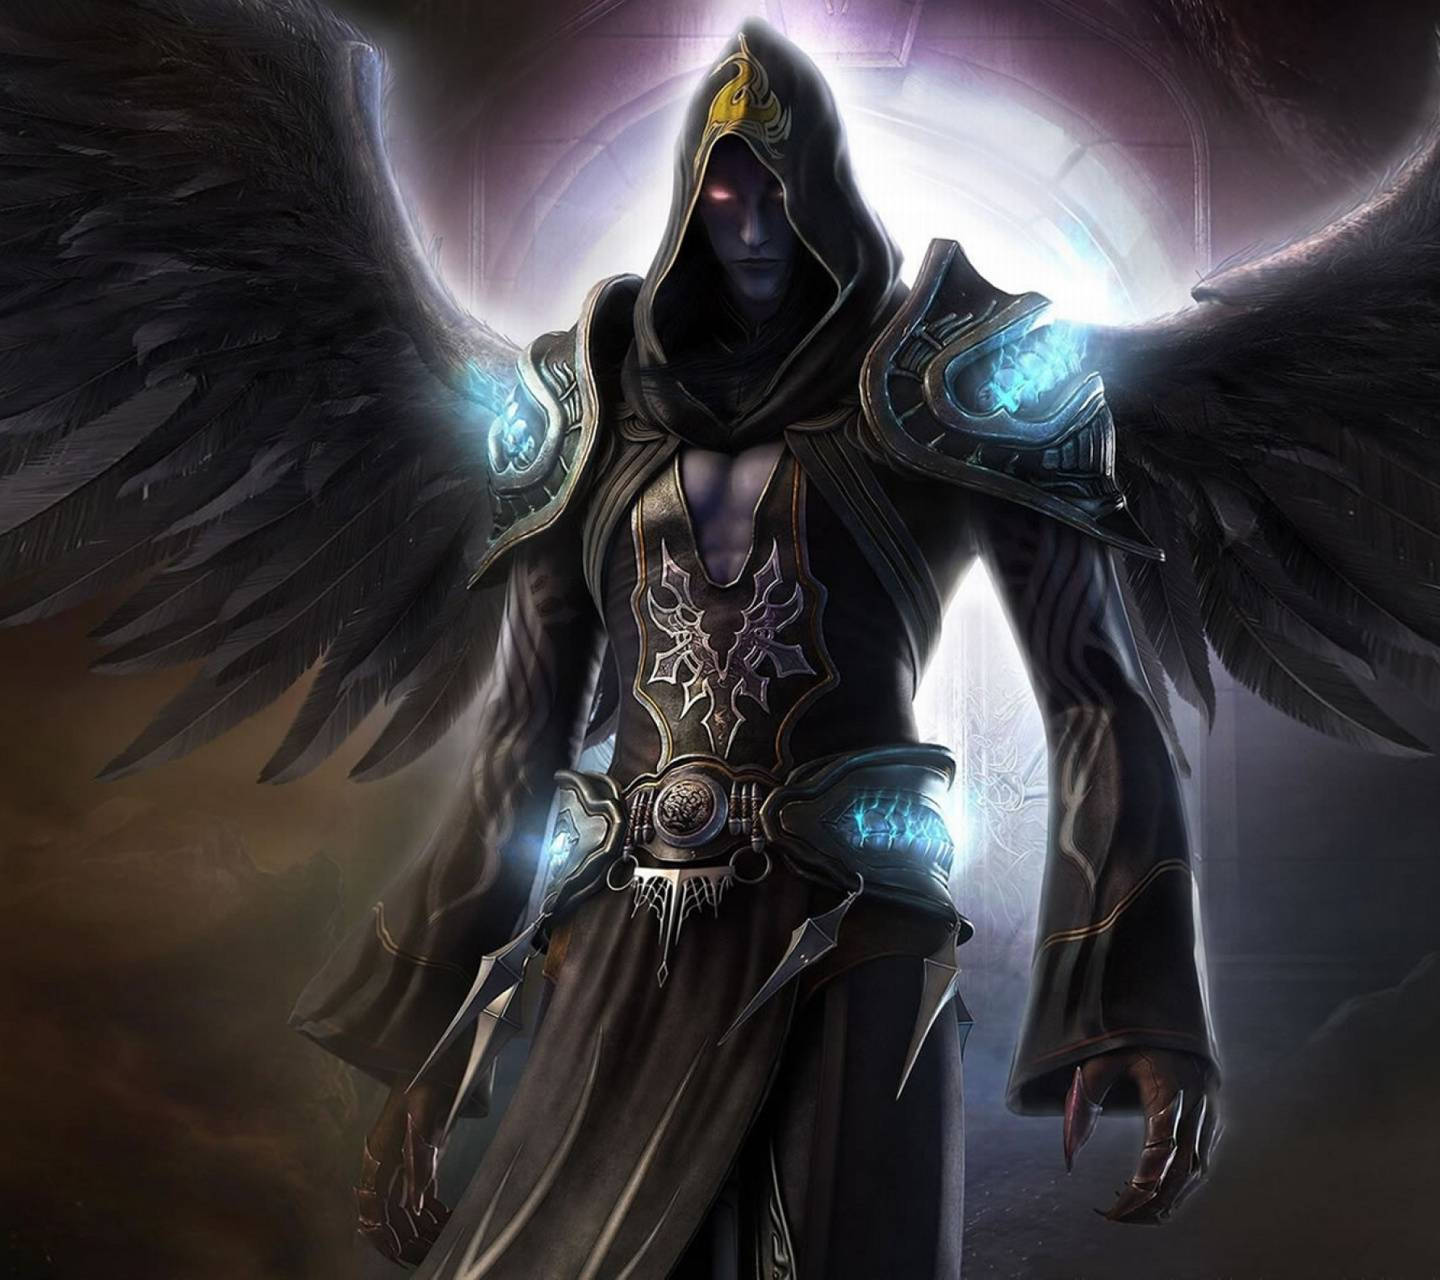 Free Lucifer Wallpaper Downloads, [100+] Lucifer Wallpapers for FREE |  